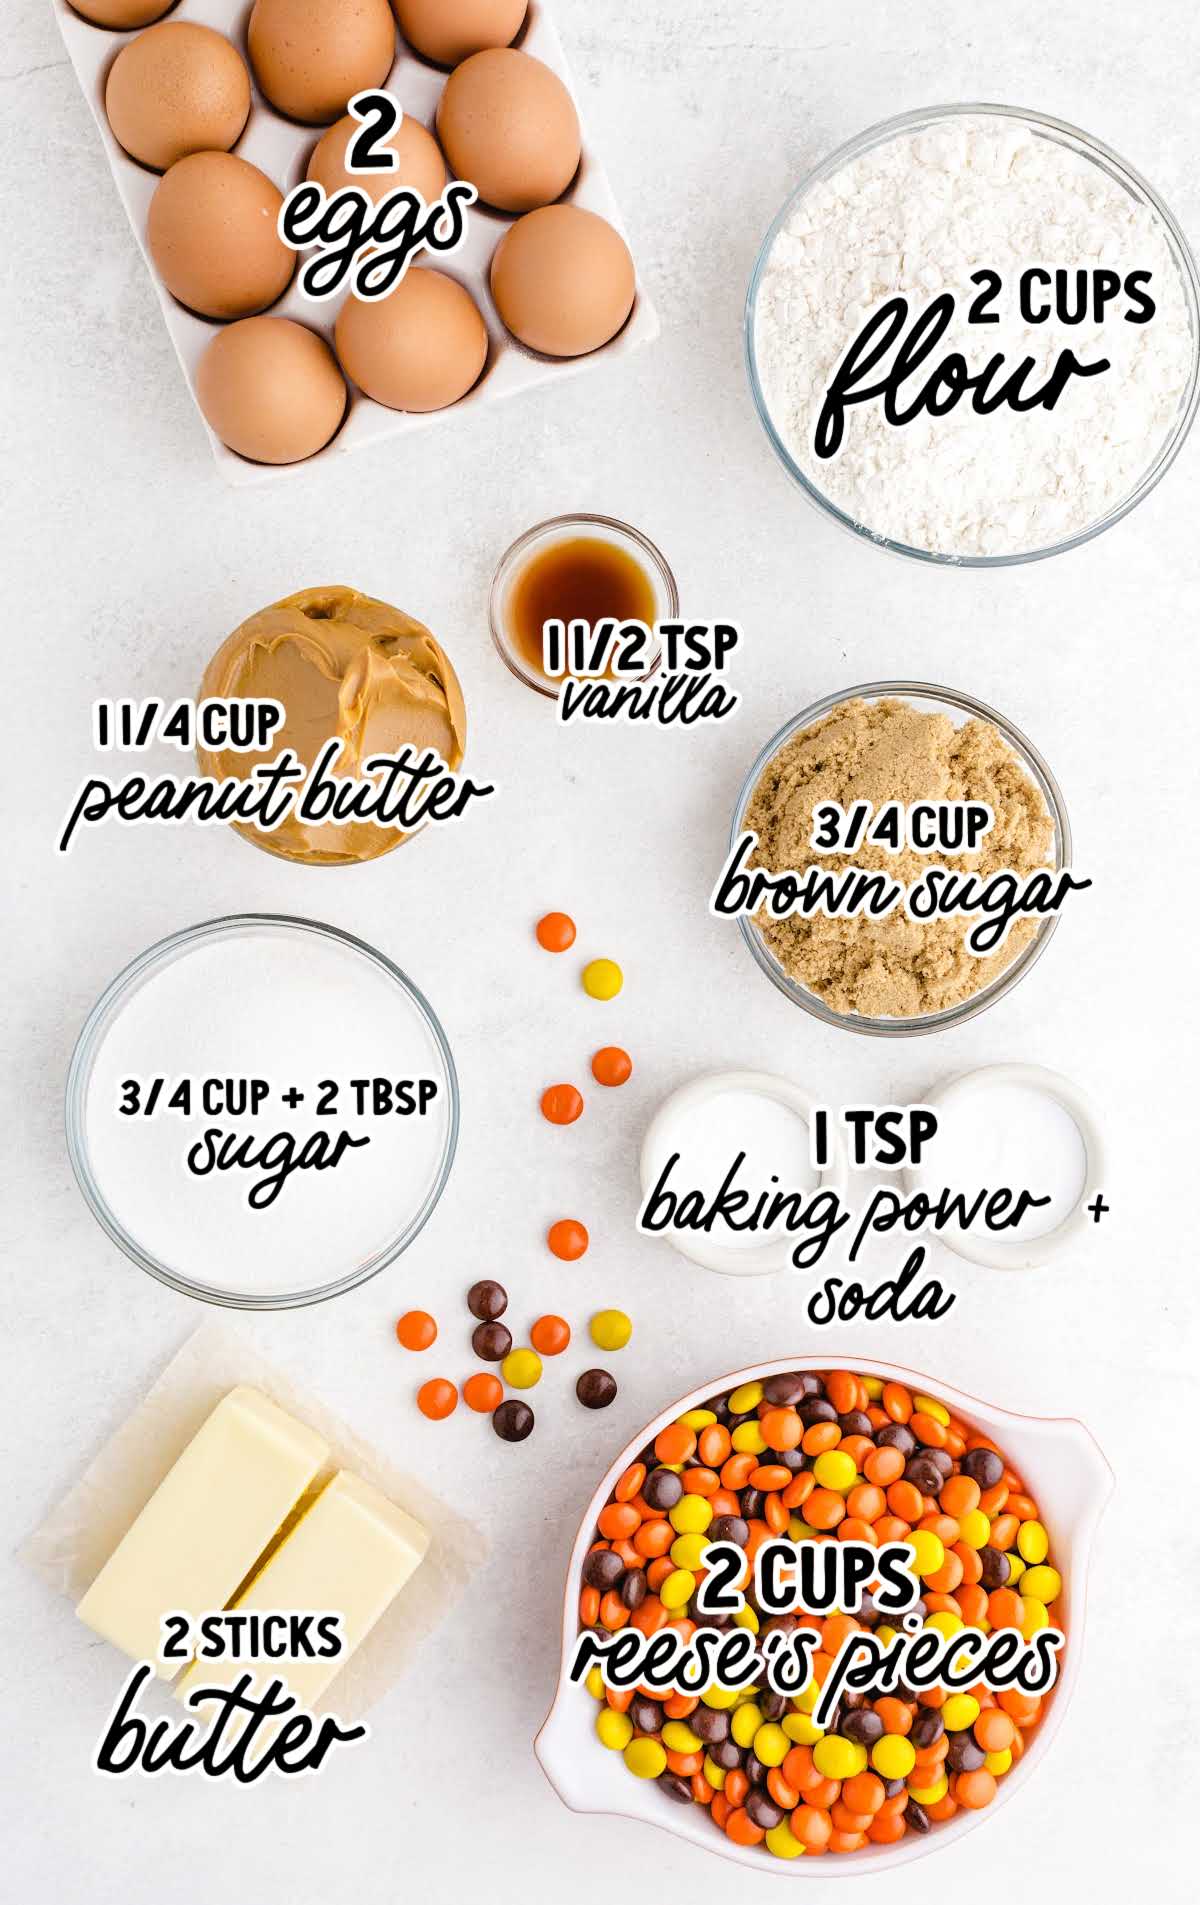 Reese's cookies raw ingredients that are labeled